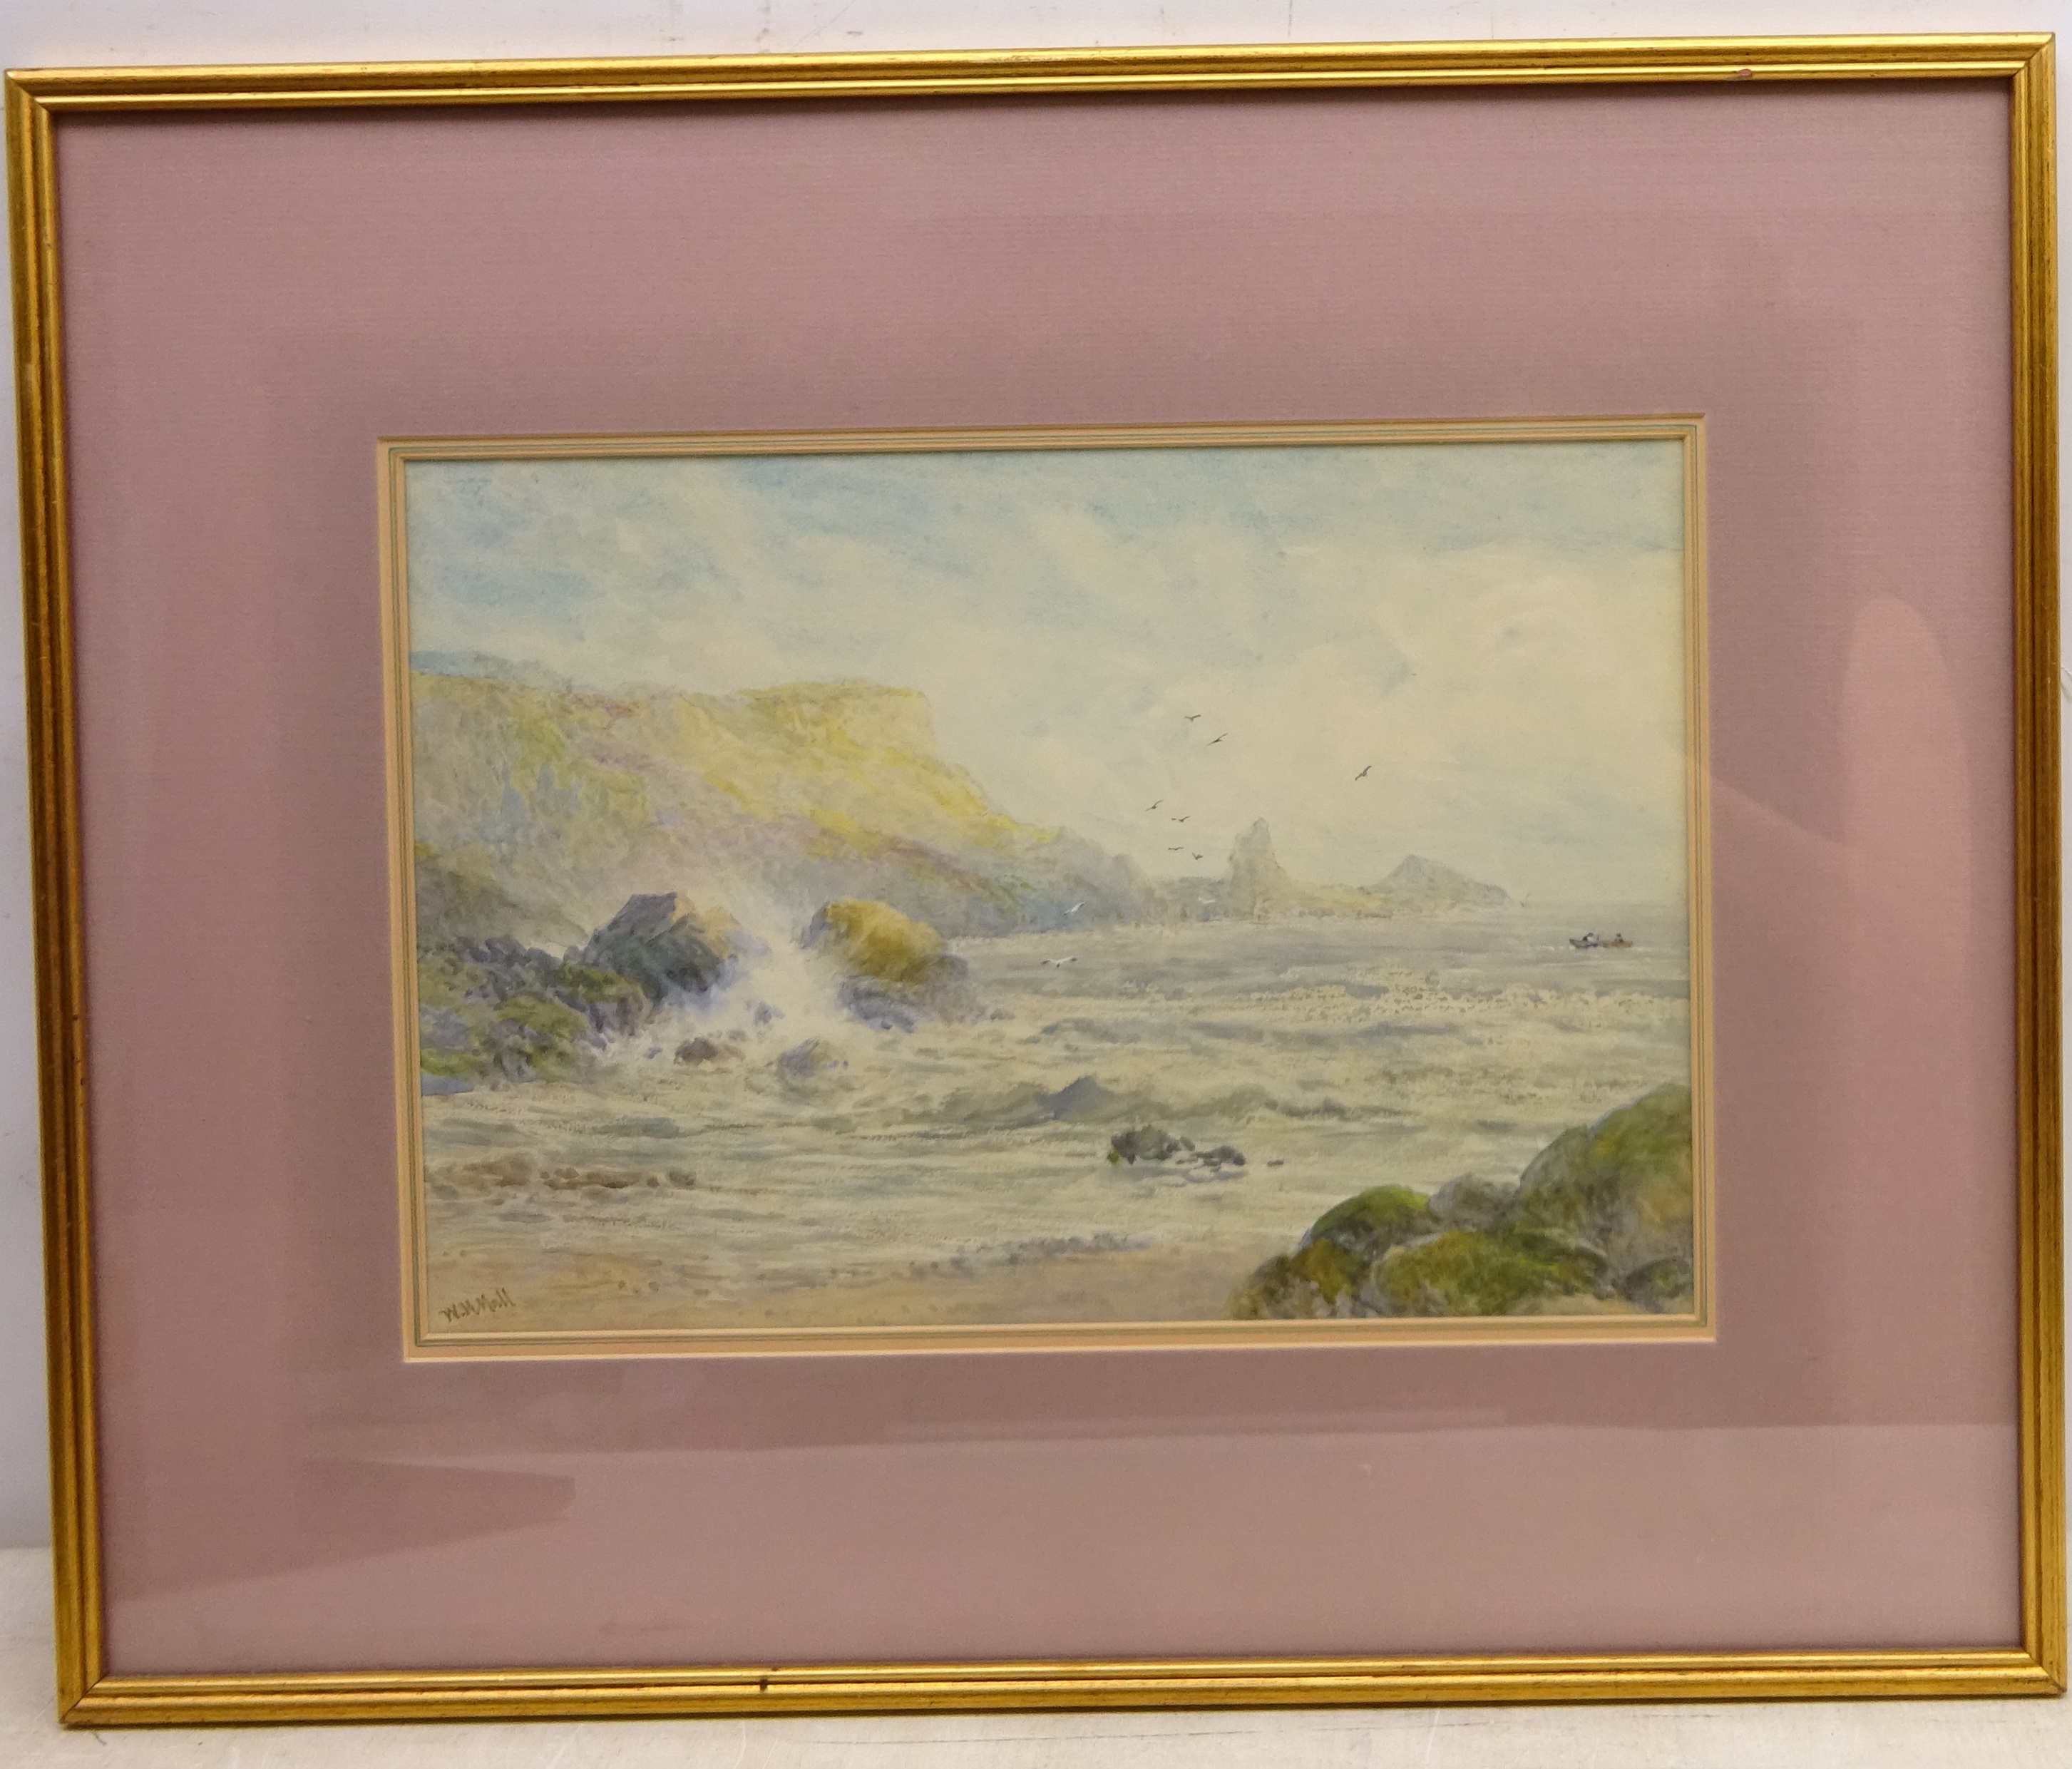 'Anstey's Cove Torquay', watercolour signed by William Henry Hall (British 1812-1880), - Image 2 of 2